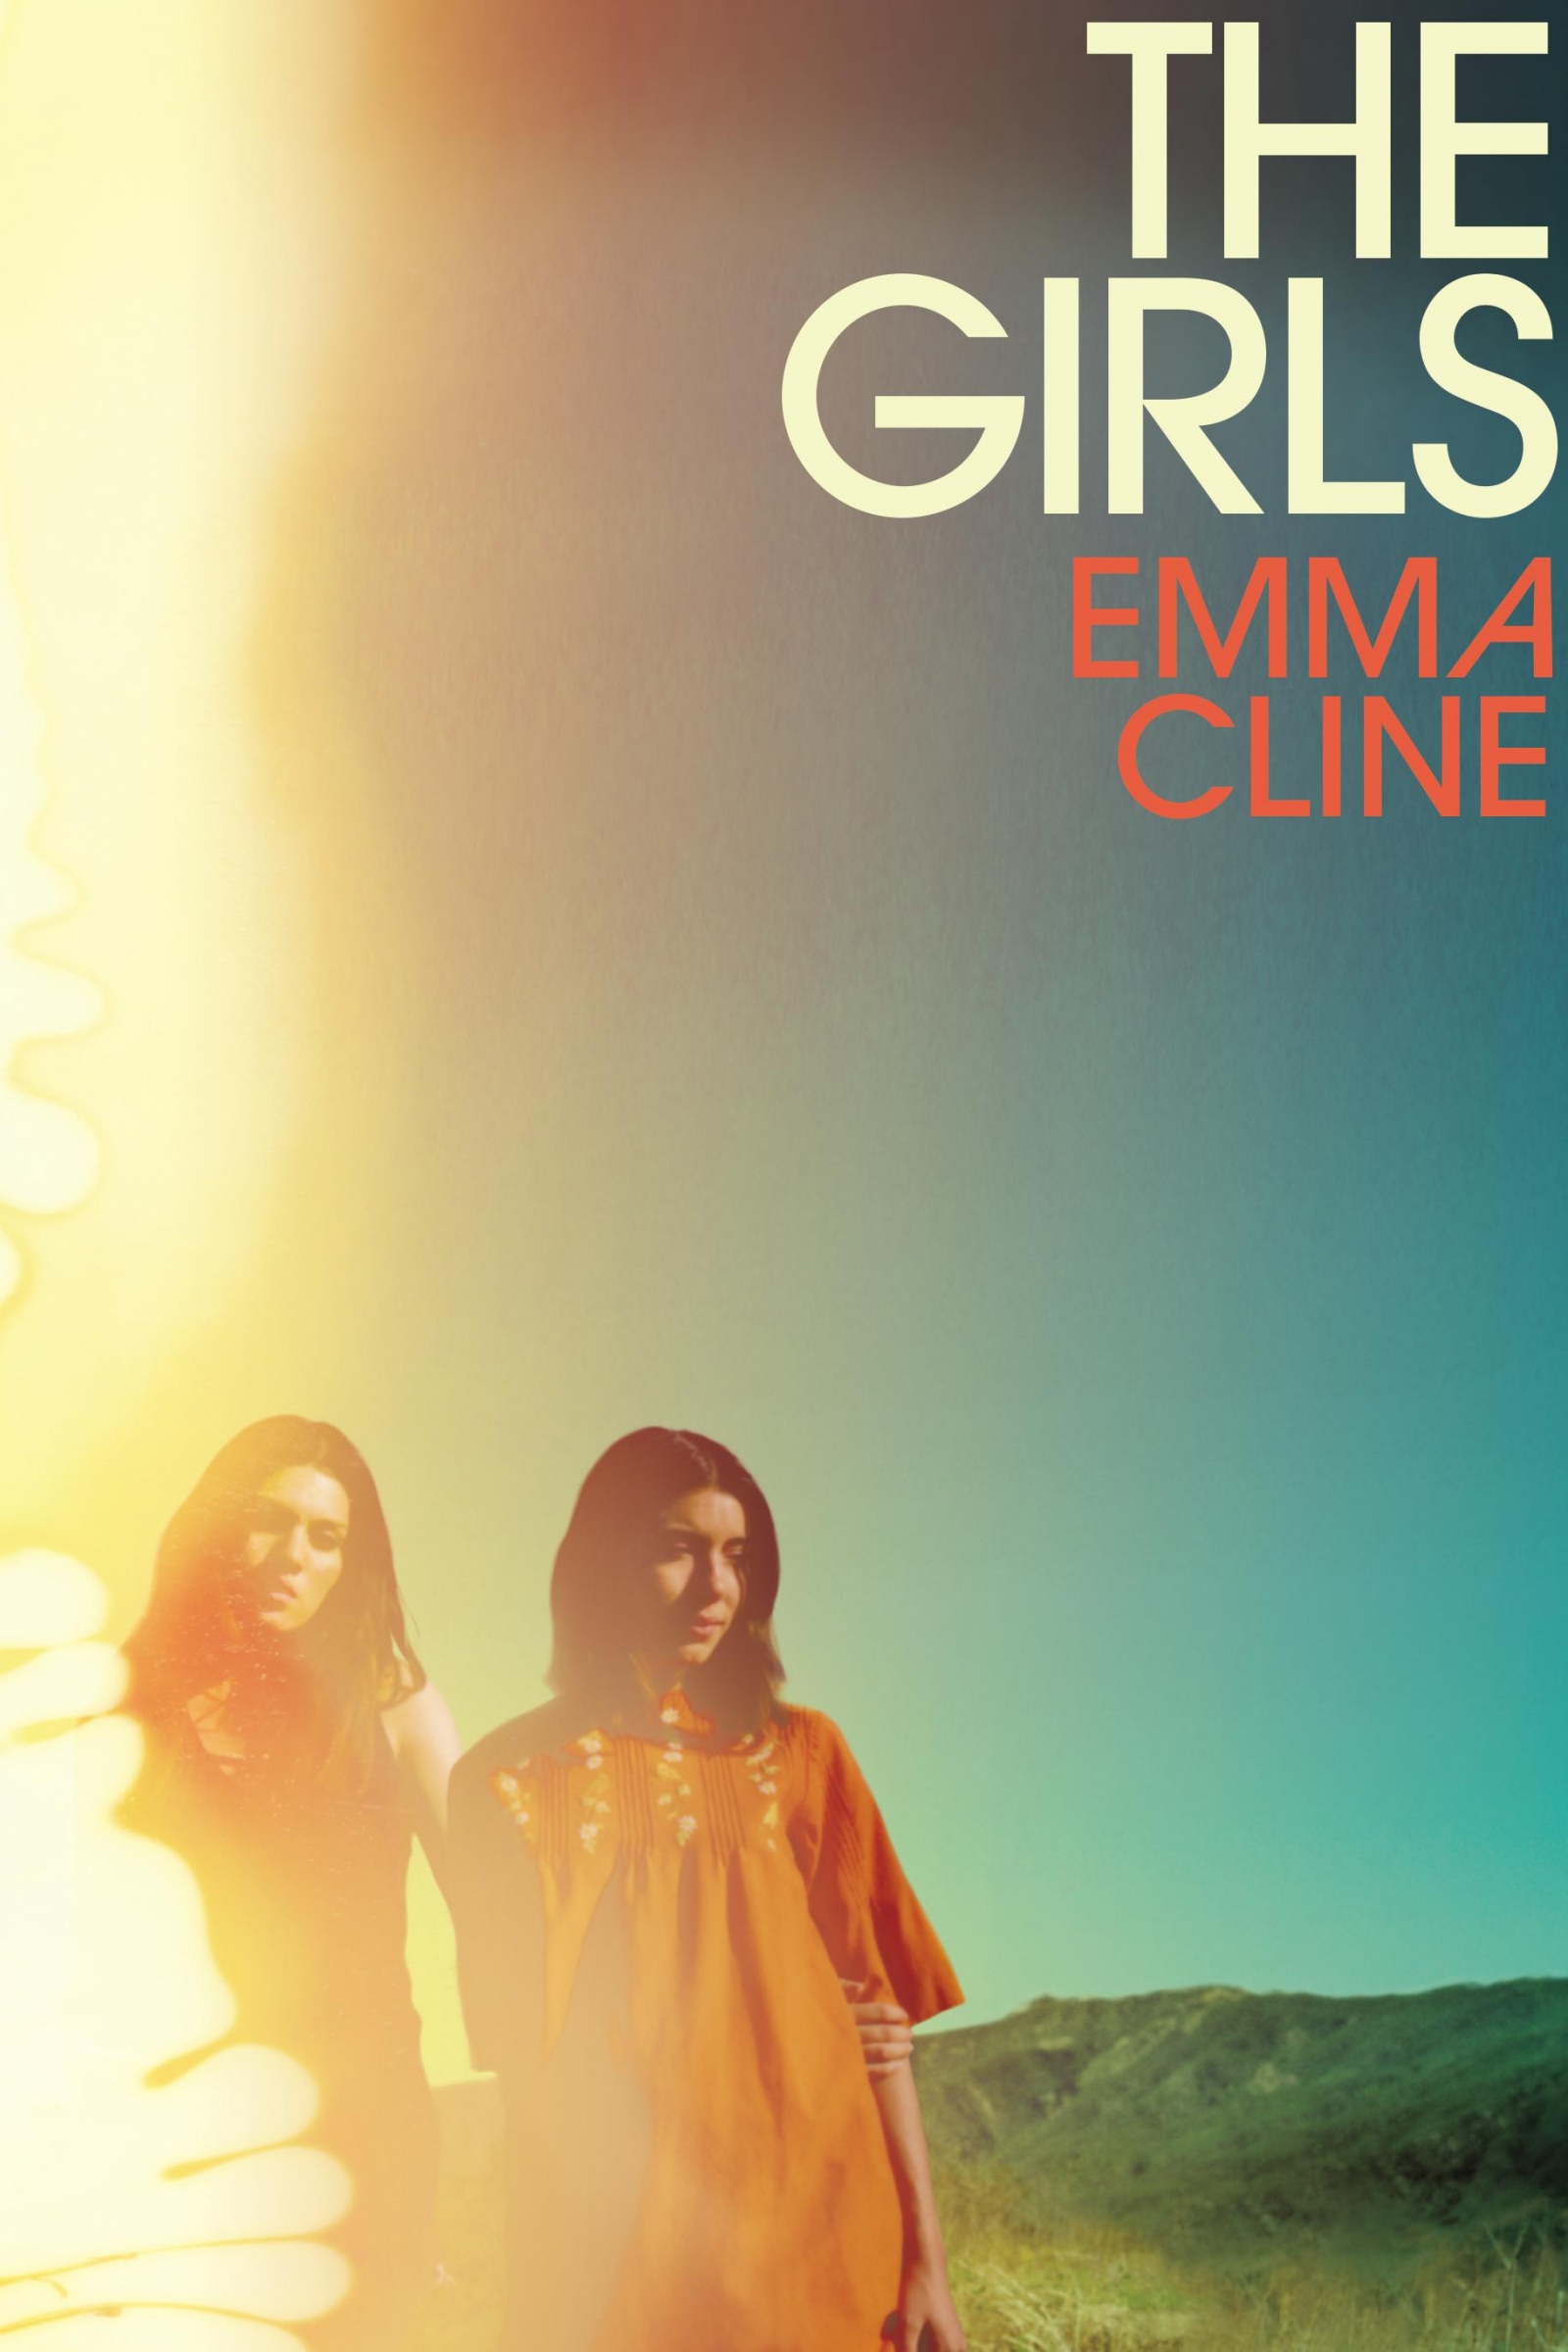 The Girls By Emma Cline A Compelling Reimagining Of The Infamous Charles Manson Cult 7514